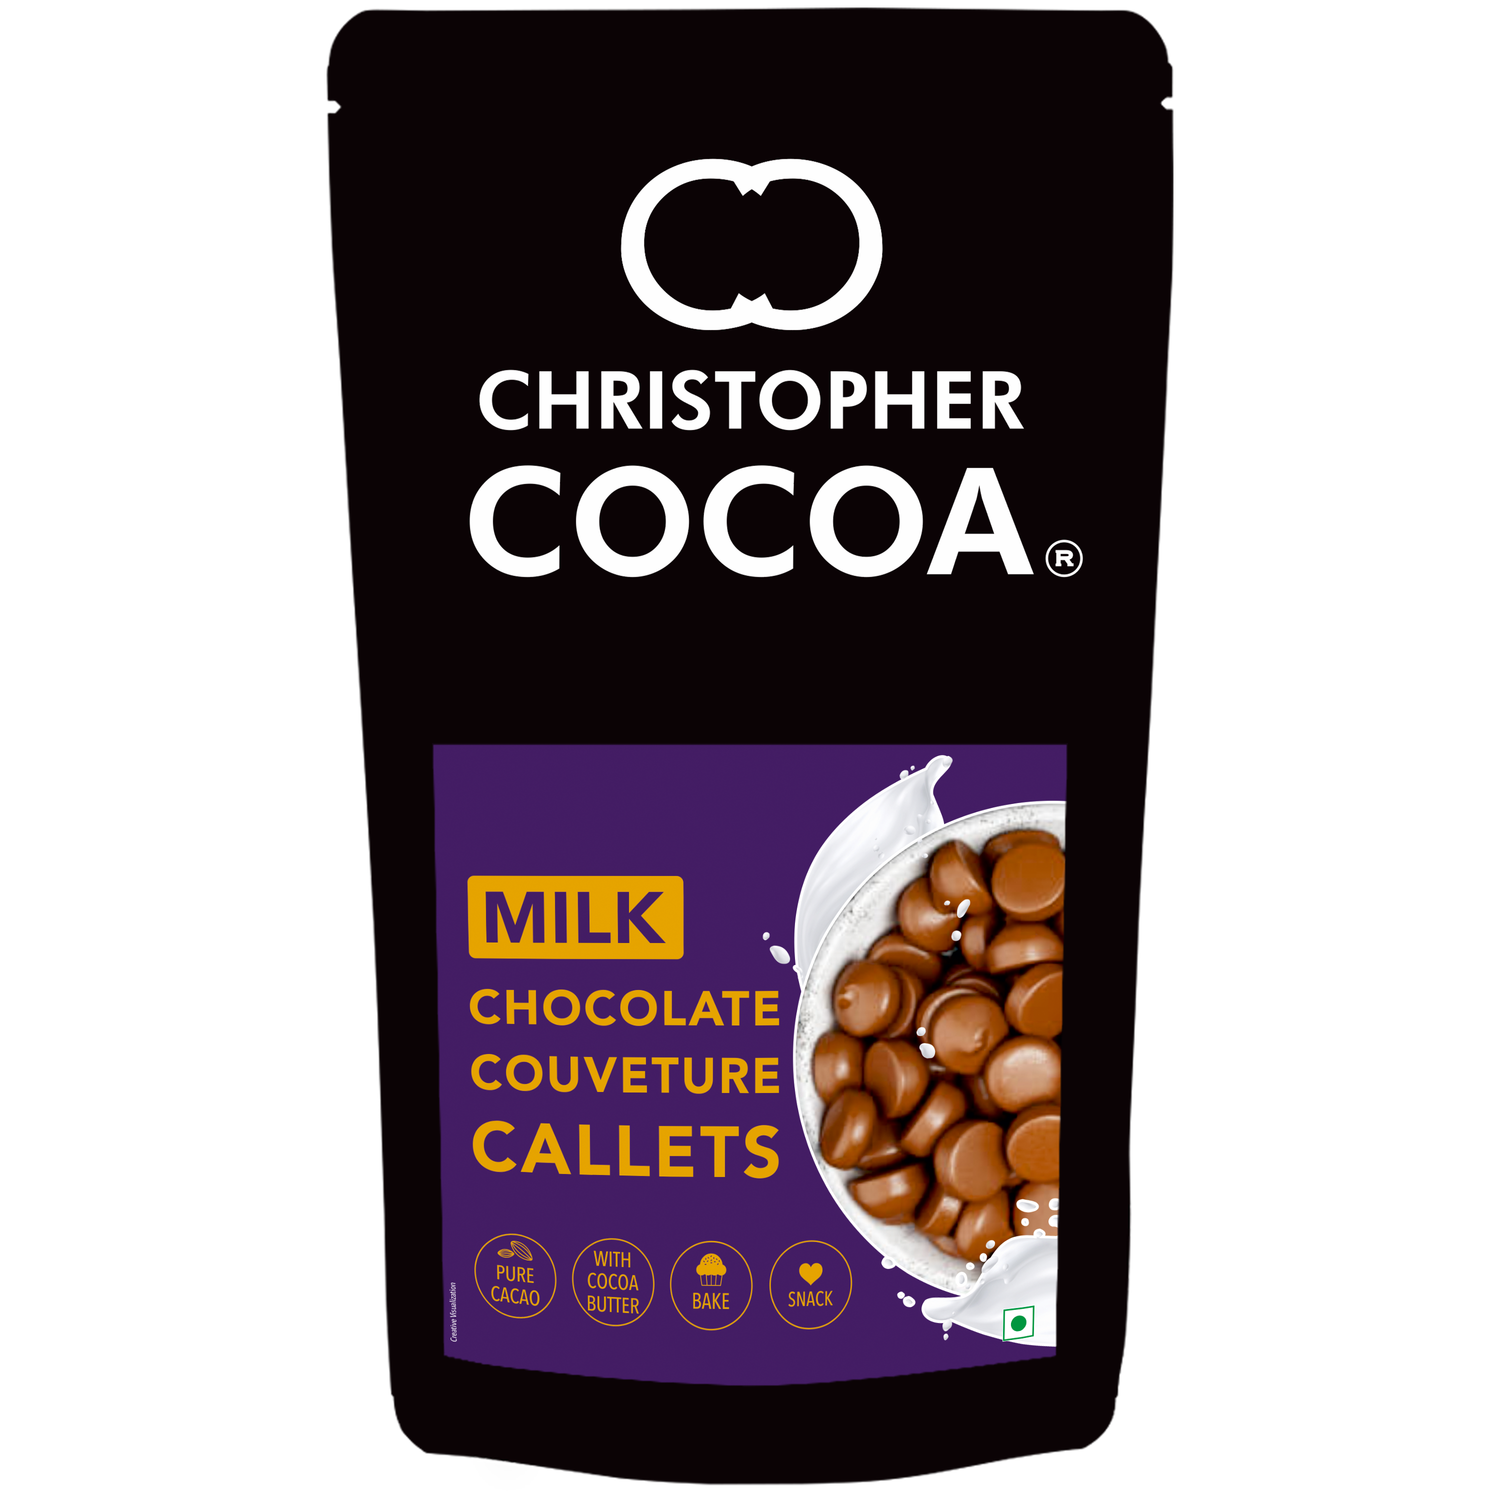 Christopher Cocoa Pure Milk Chocolate Couverture Callets 1Kg (Chocolate Chips, Buttons, Snack, Bake, Cake, Hot Chocolate) 